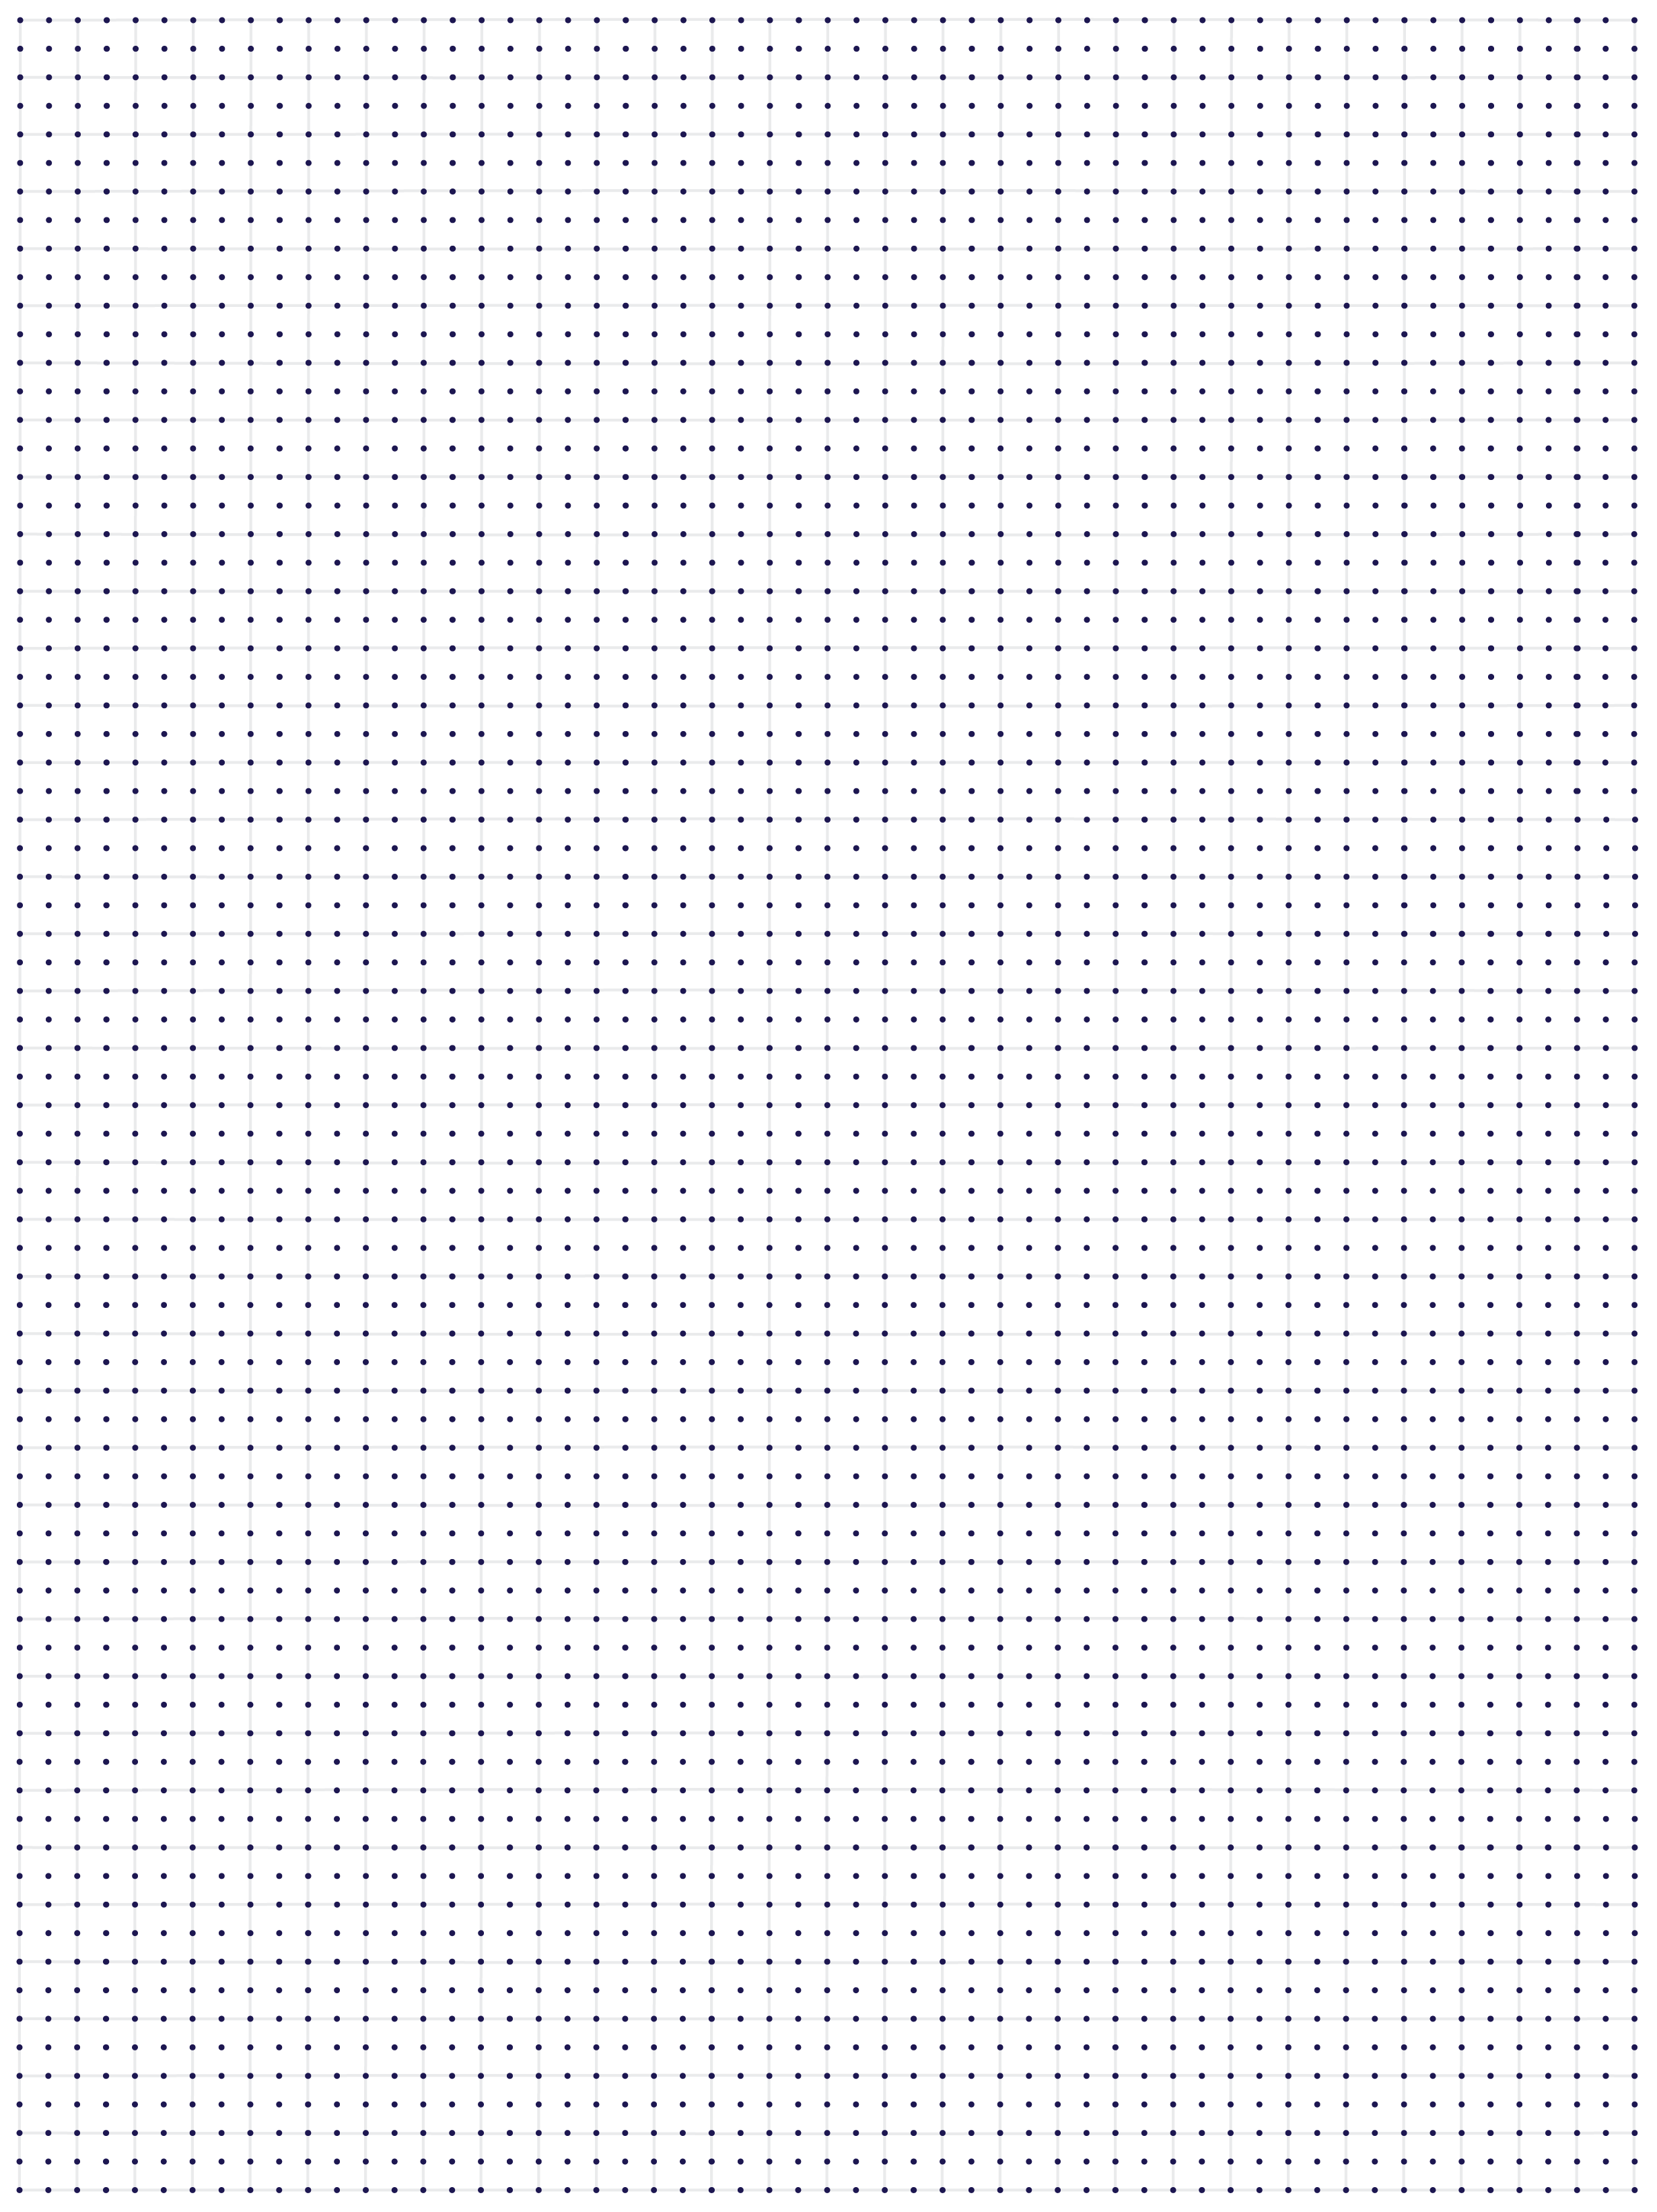 Free Printable Dot Grid Paper With And Without Background Lines 